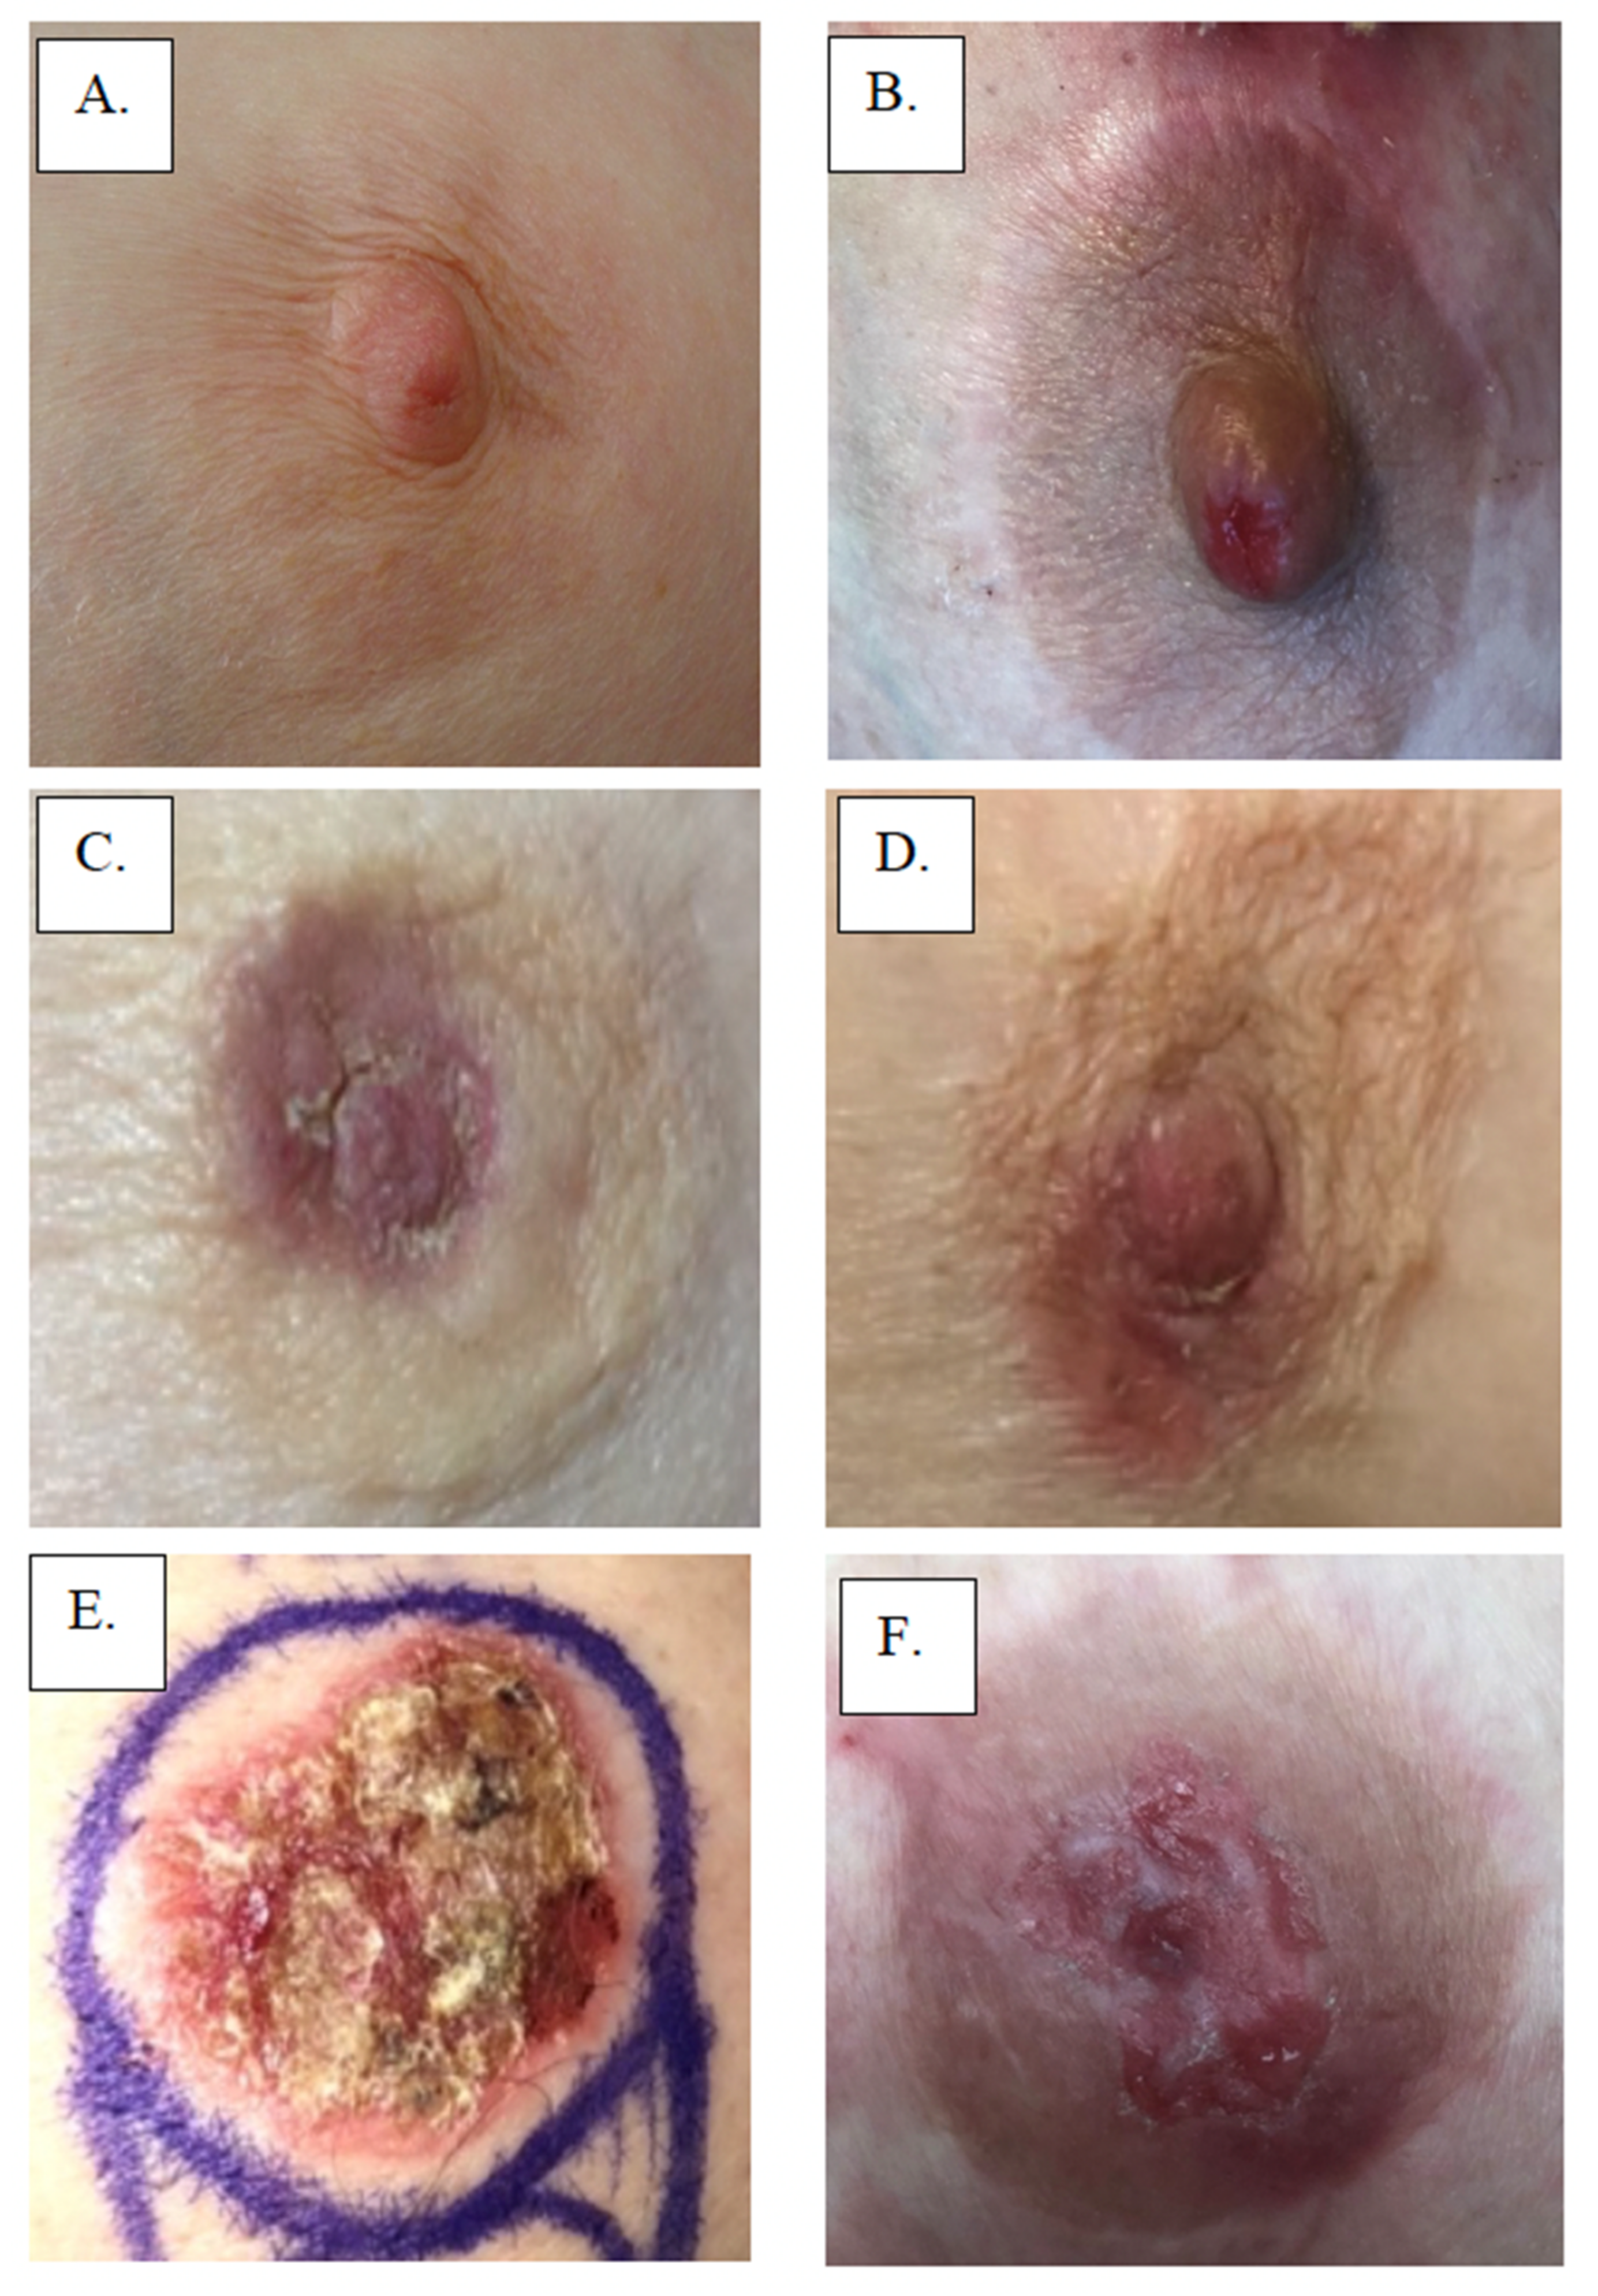 Tissue and Breast Skin Conditions